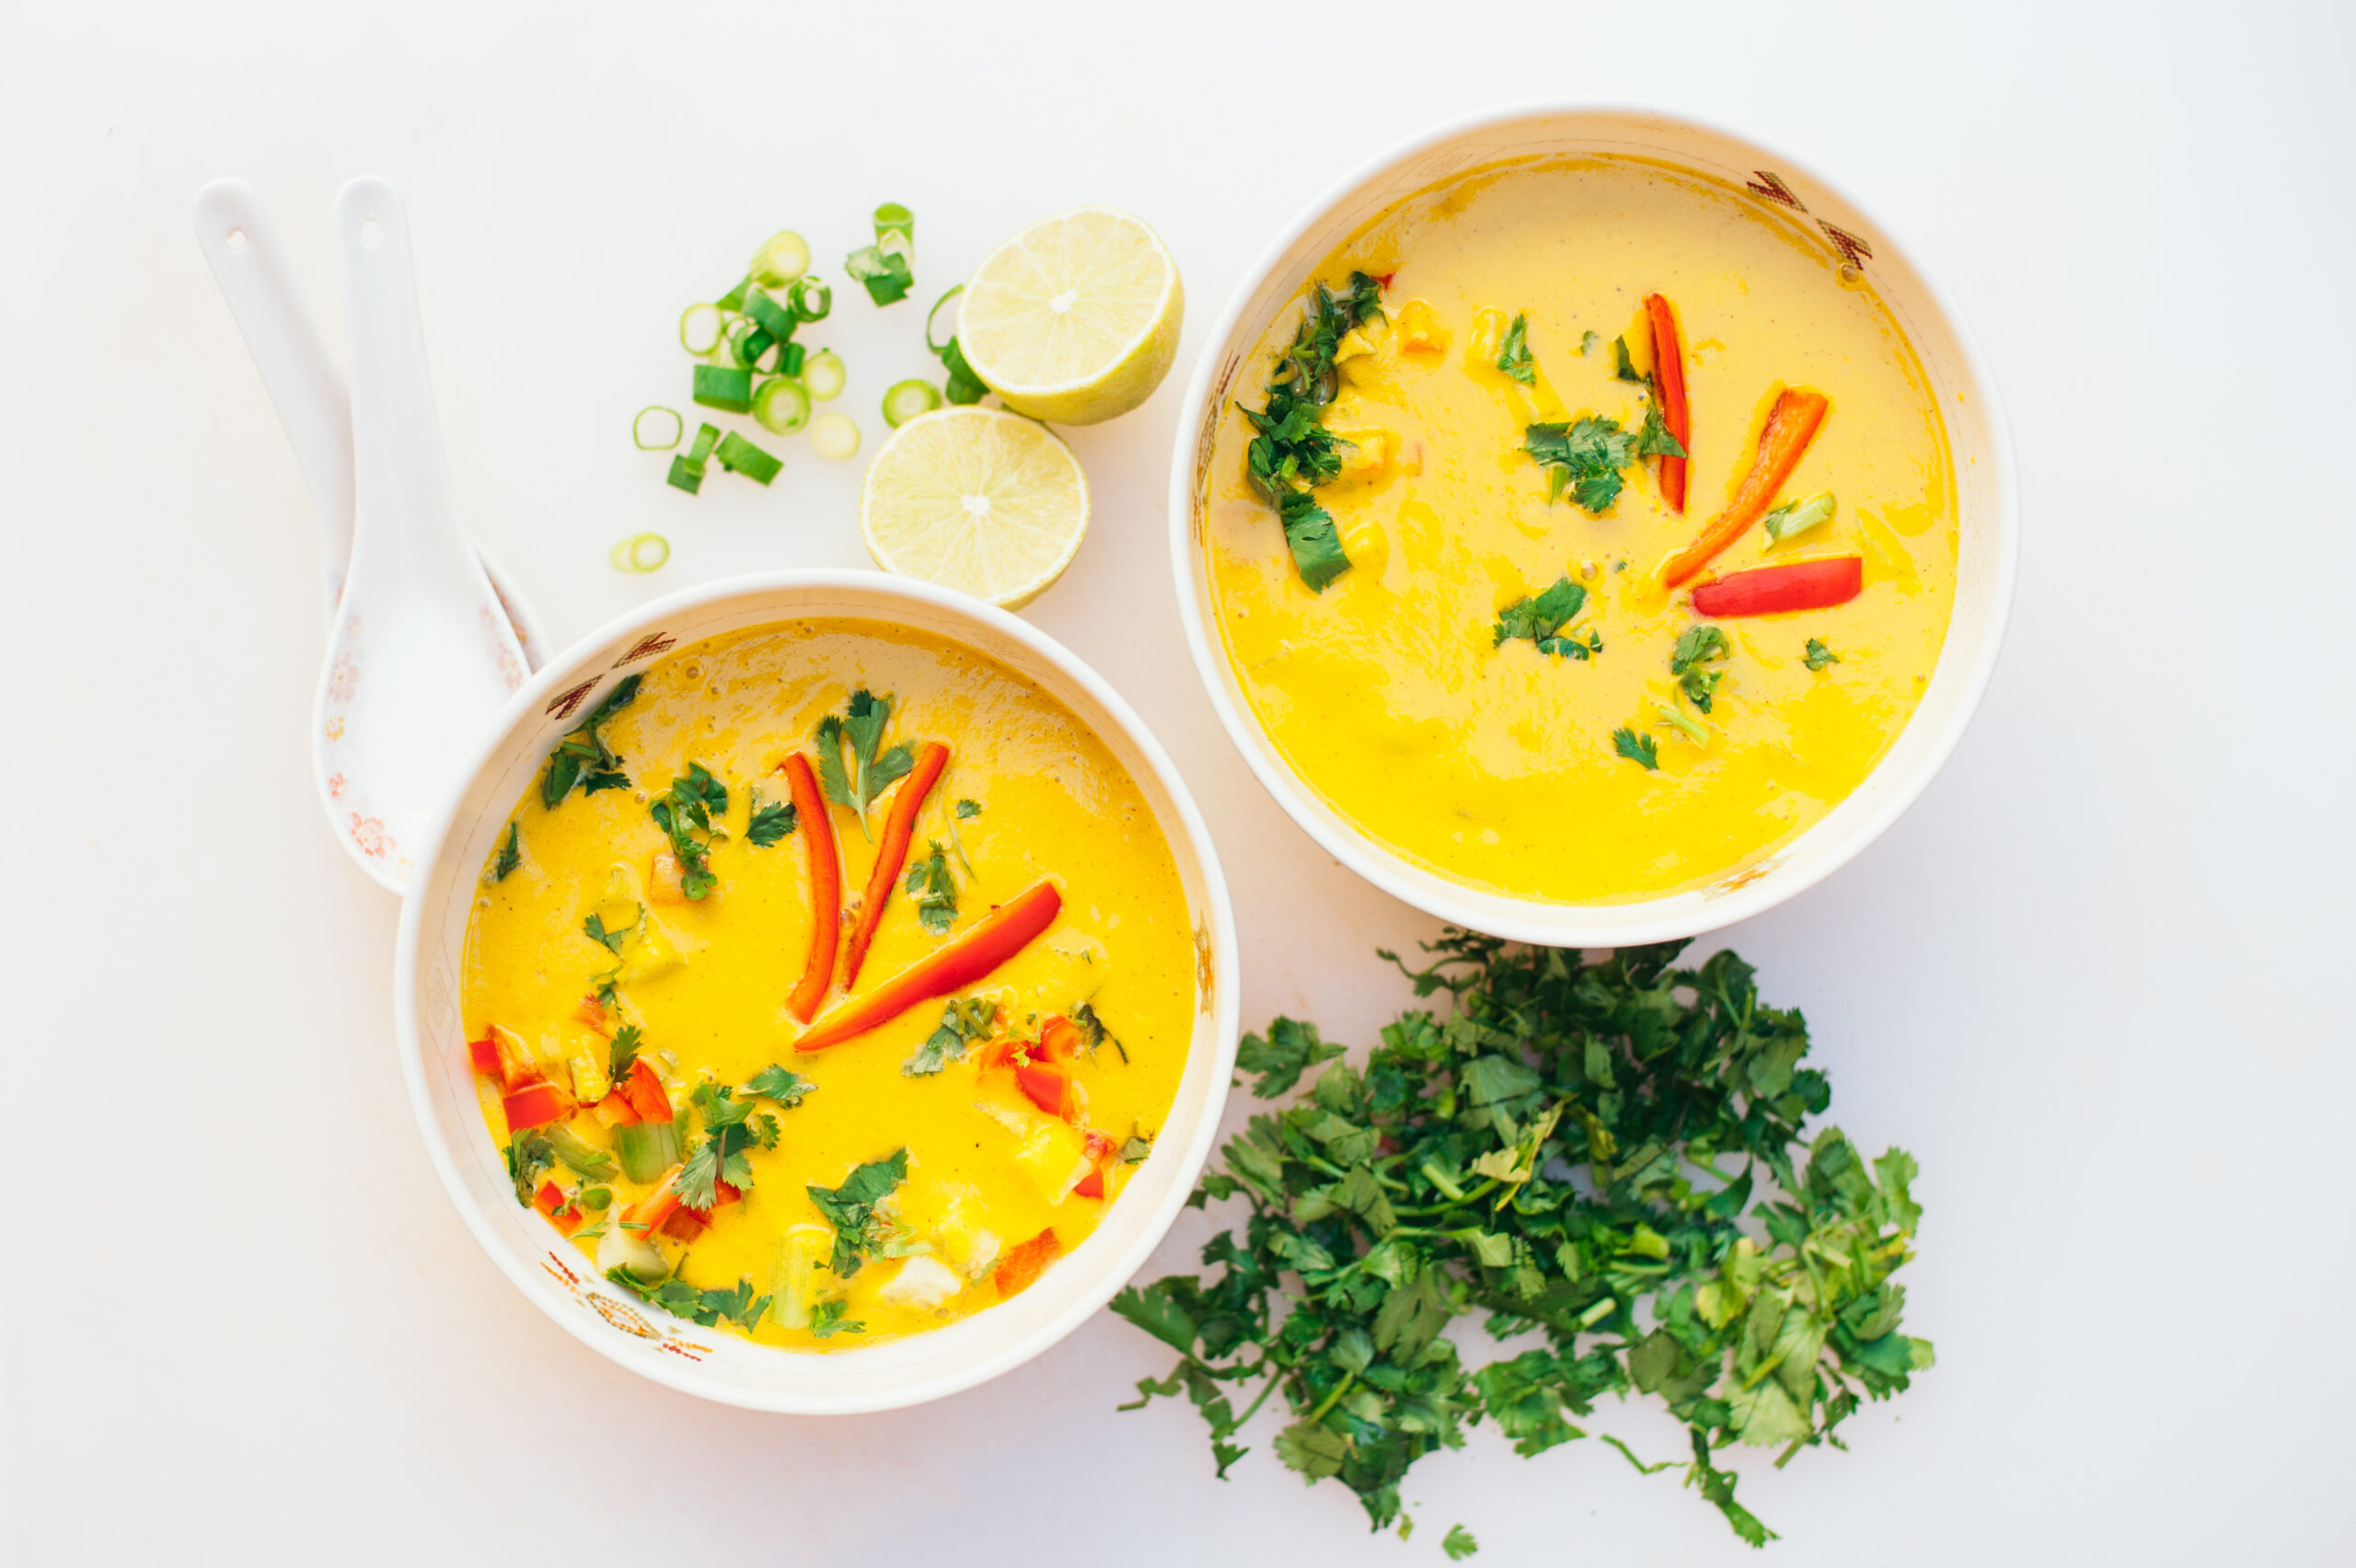 Two bowls of fresh coconut curry soup with cut green parsley, slices of lime, spoons, isolated over white background. Curry bowl for dinner. Vegetarian food concept